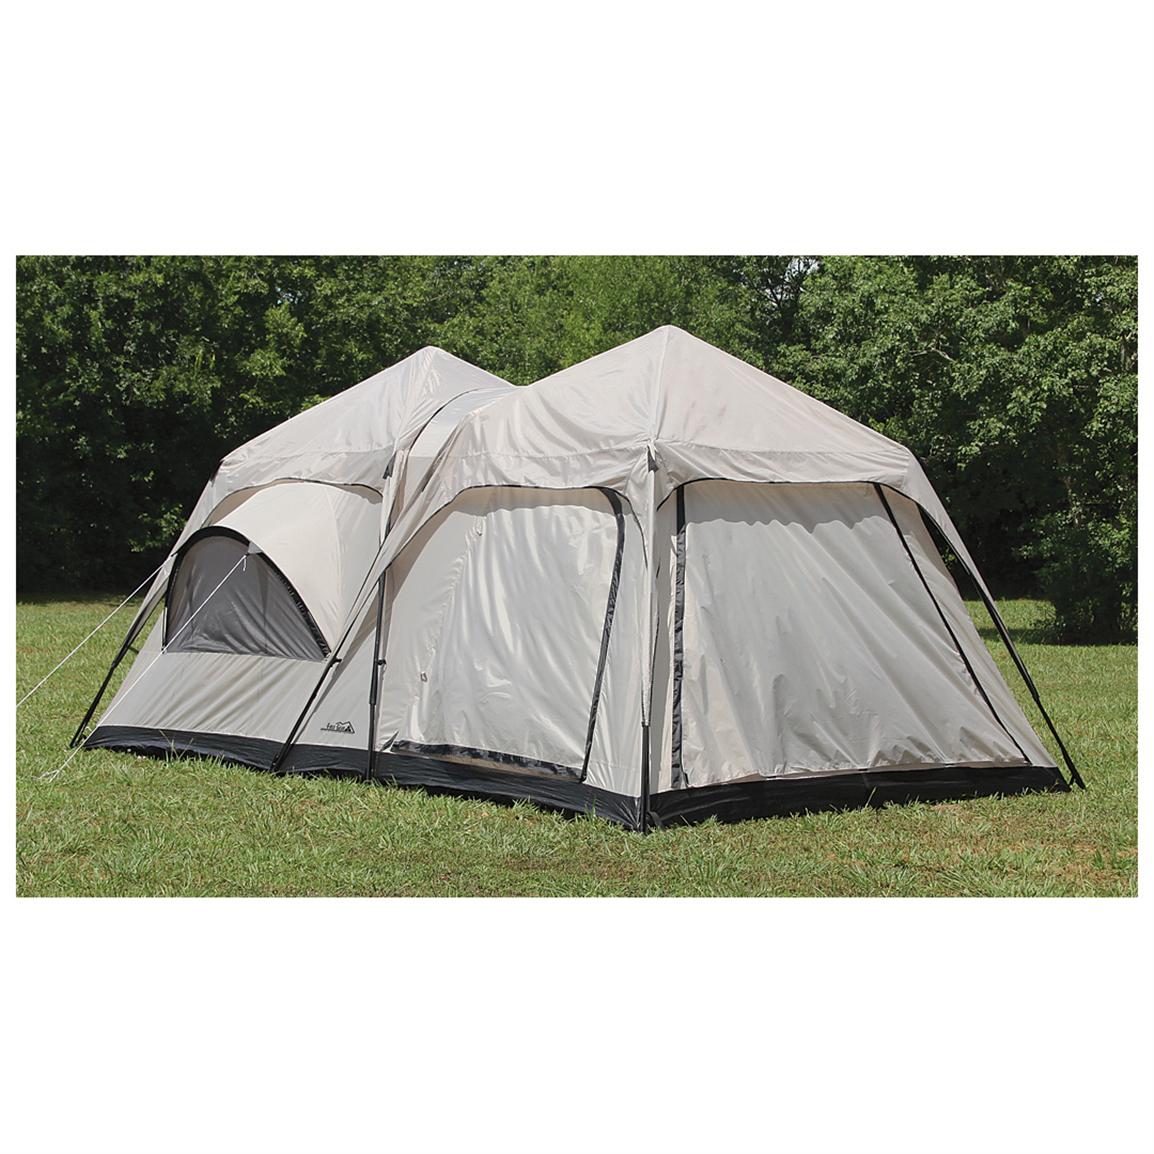 Texsport Twin Peaks 2room Cabin Dome Tent 594029, Cabin Tents at Sportsman's Guide